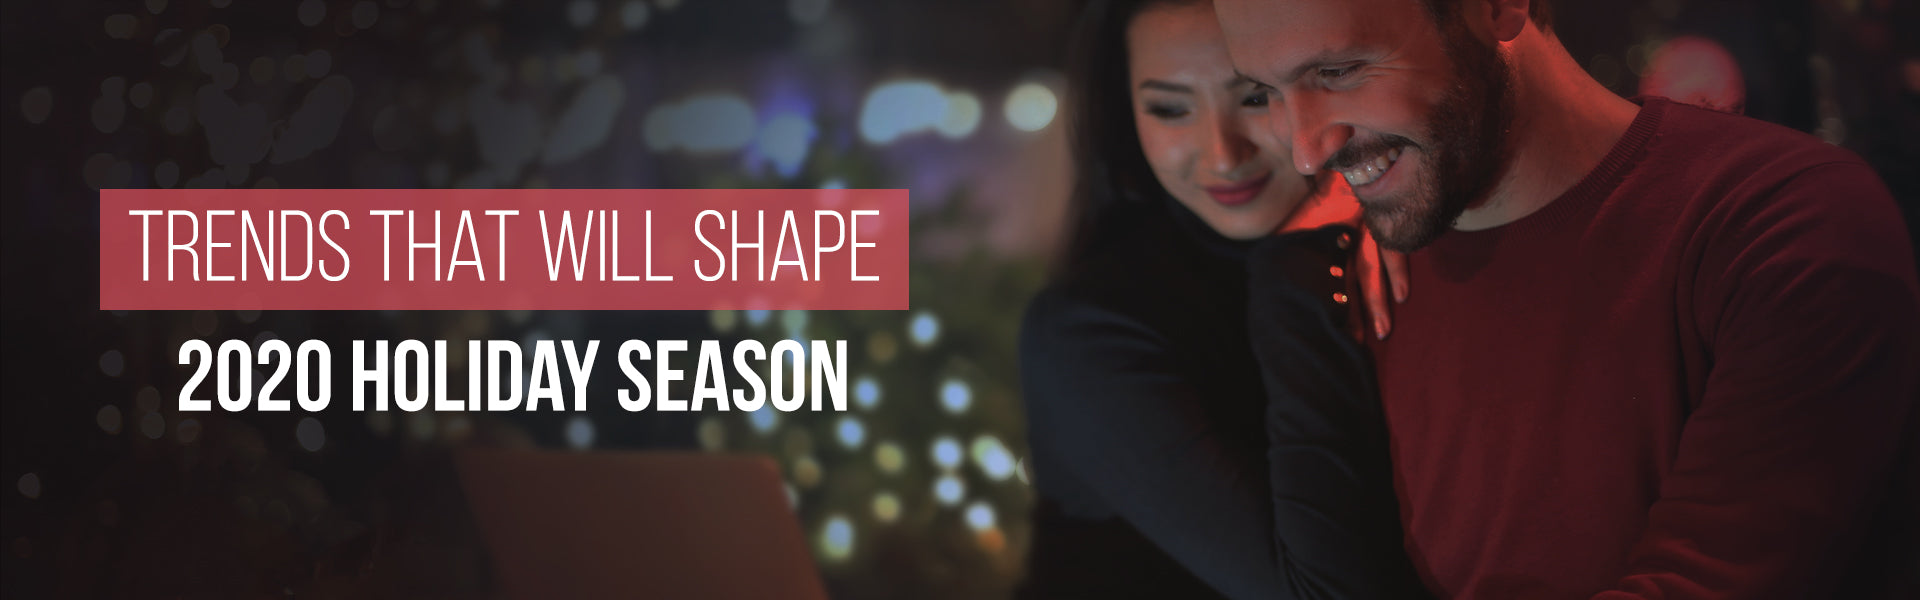 Trends That Will Shape 2020 Holiday Season